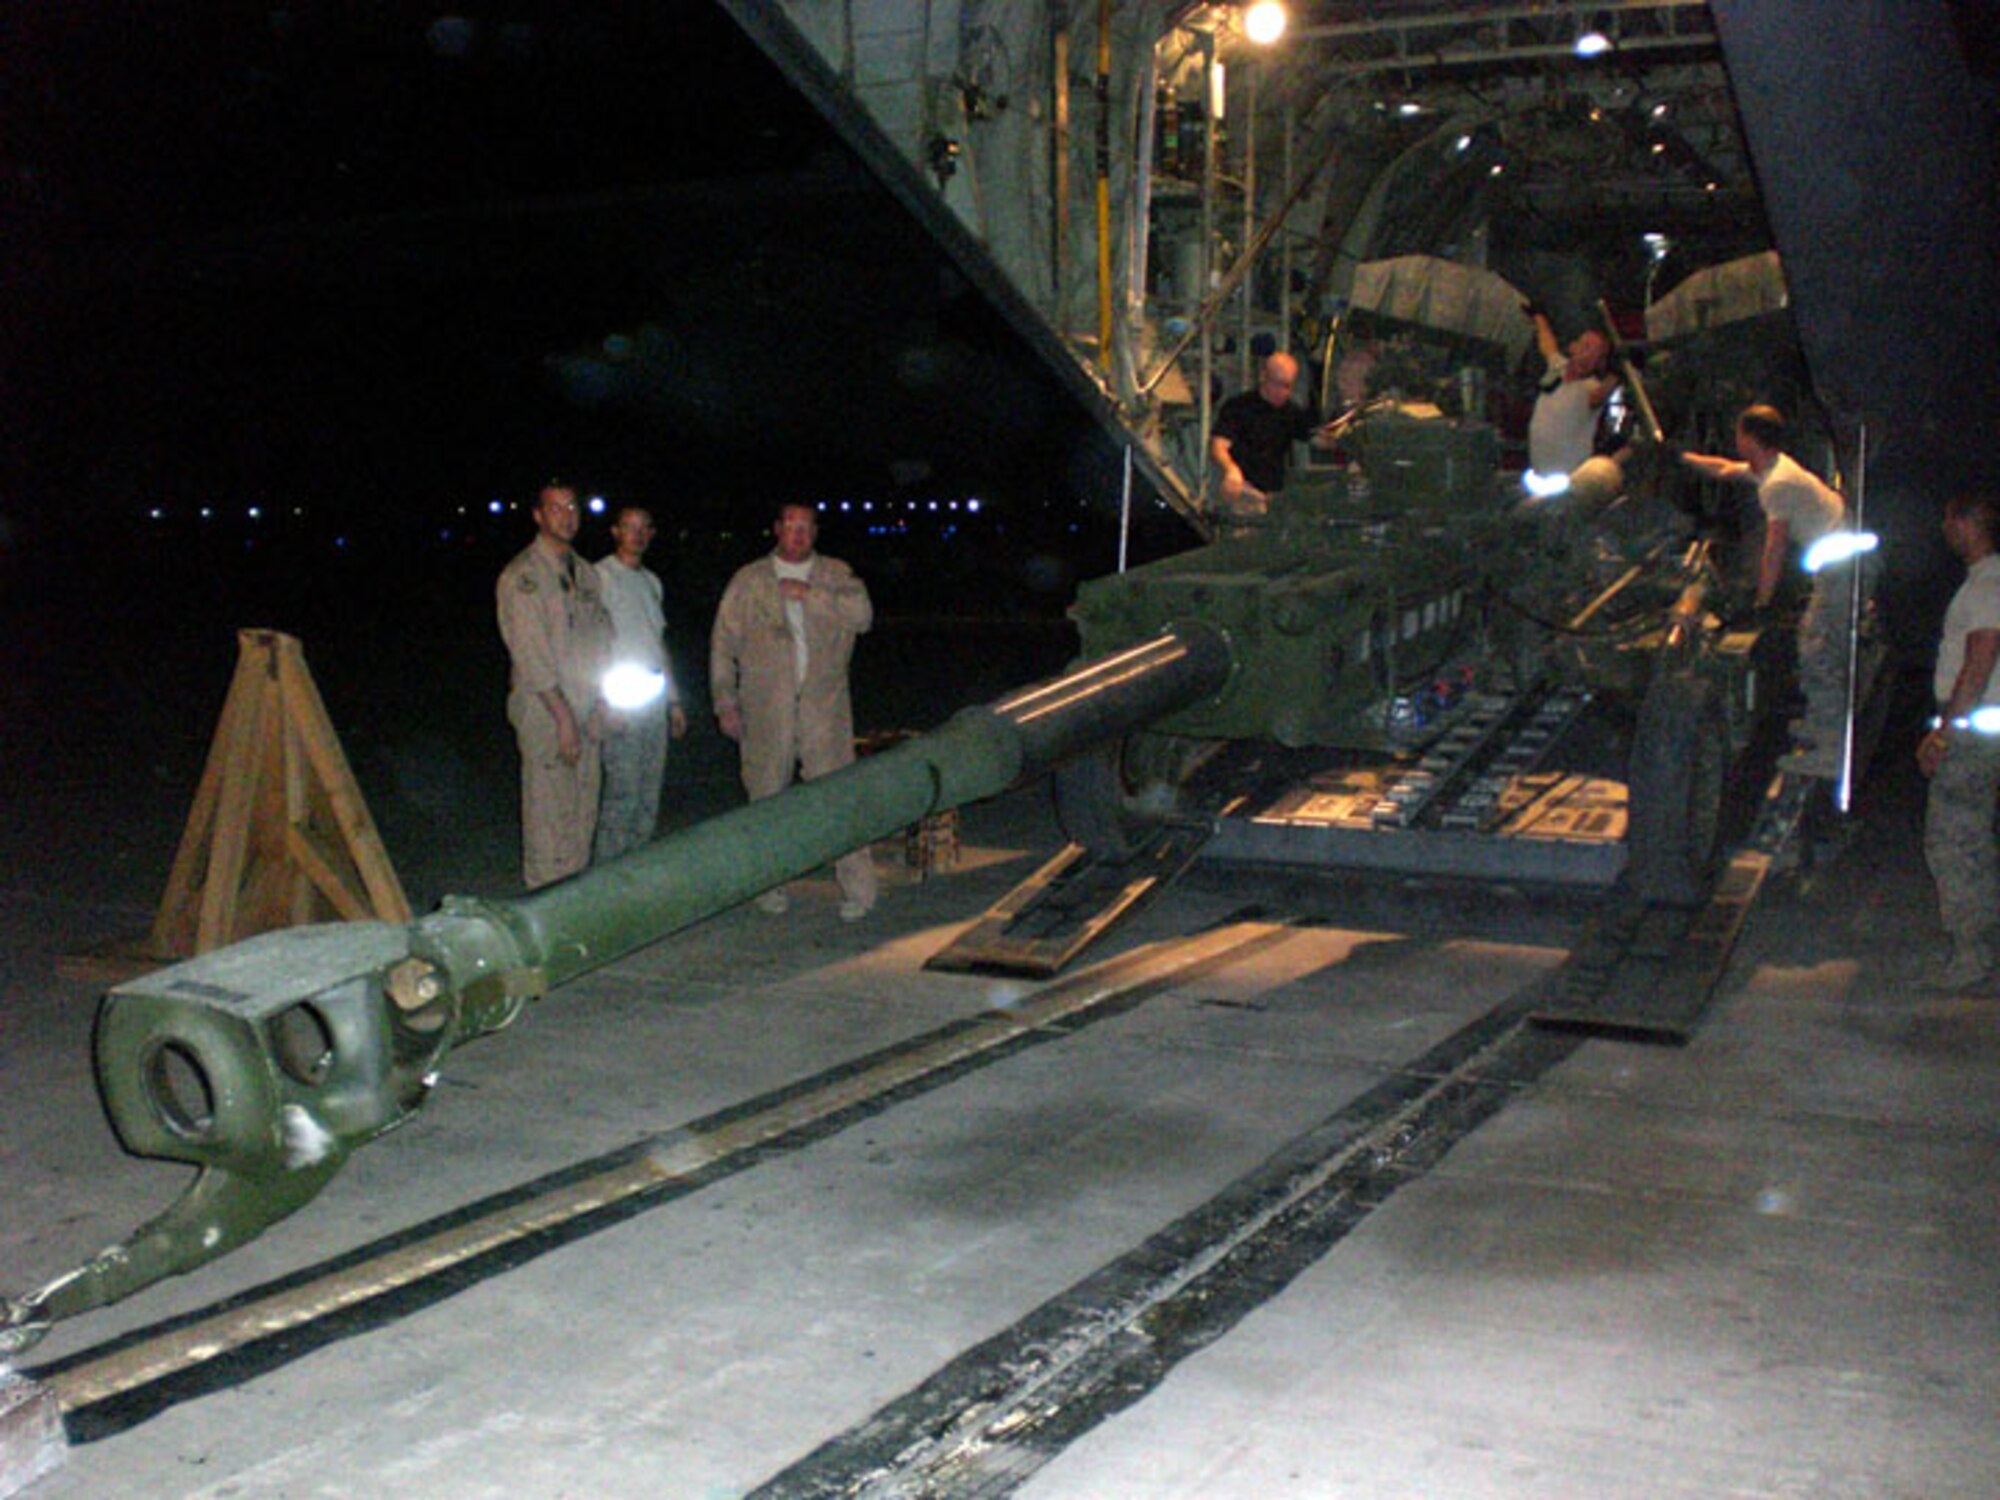 Deployed Airmen from the 139th Airlift Wing load a howitzer at a forward operating location.  (Submitted photograph)